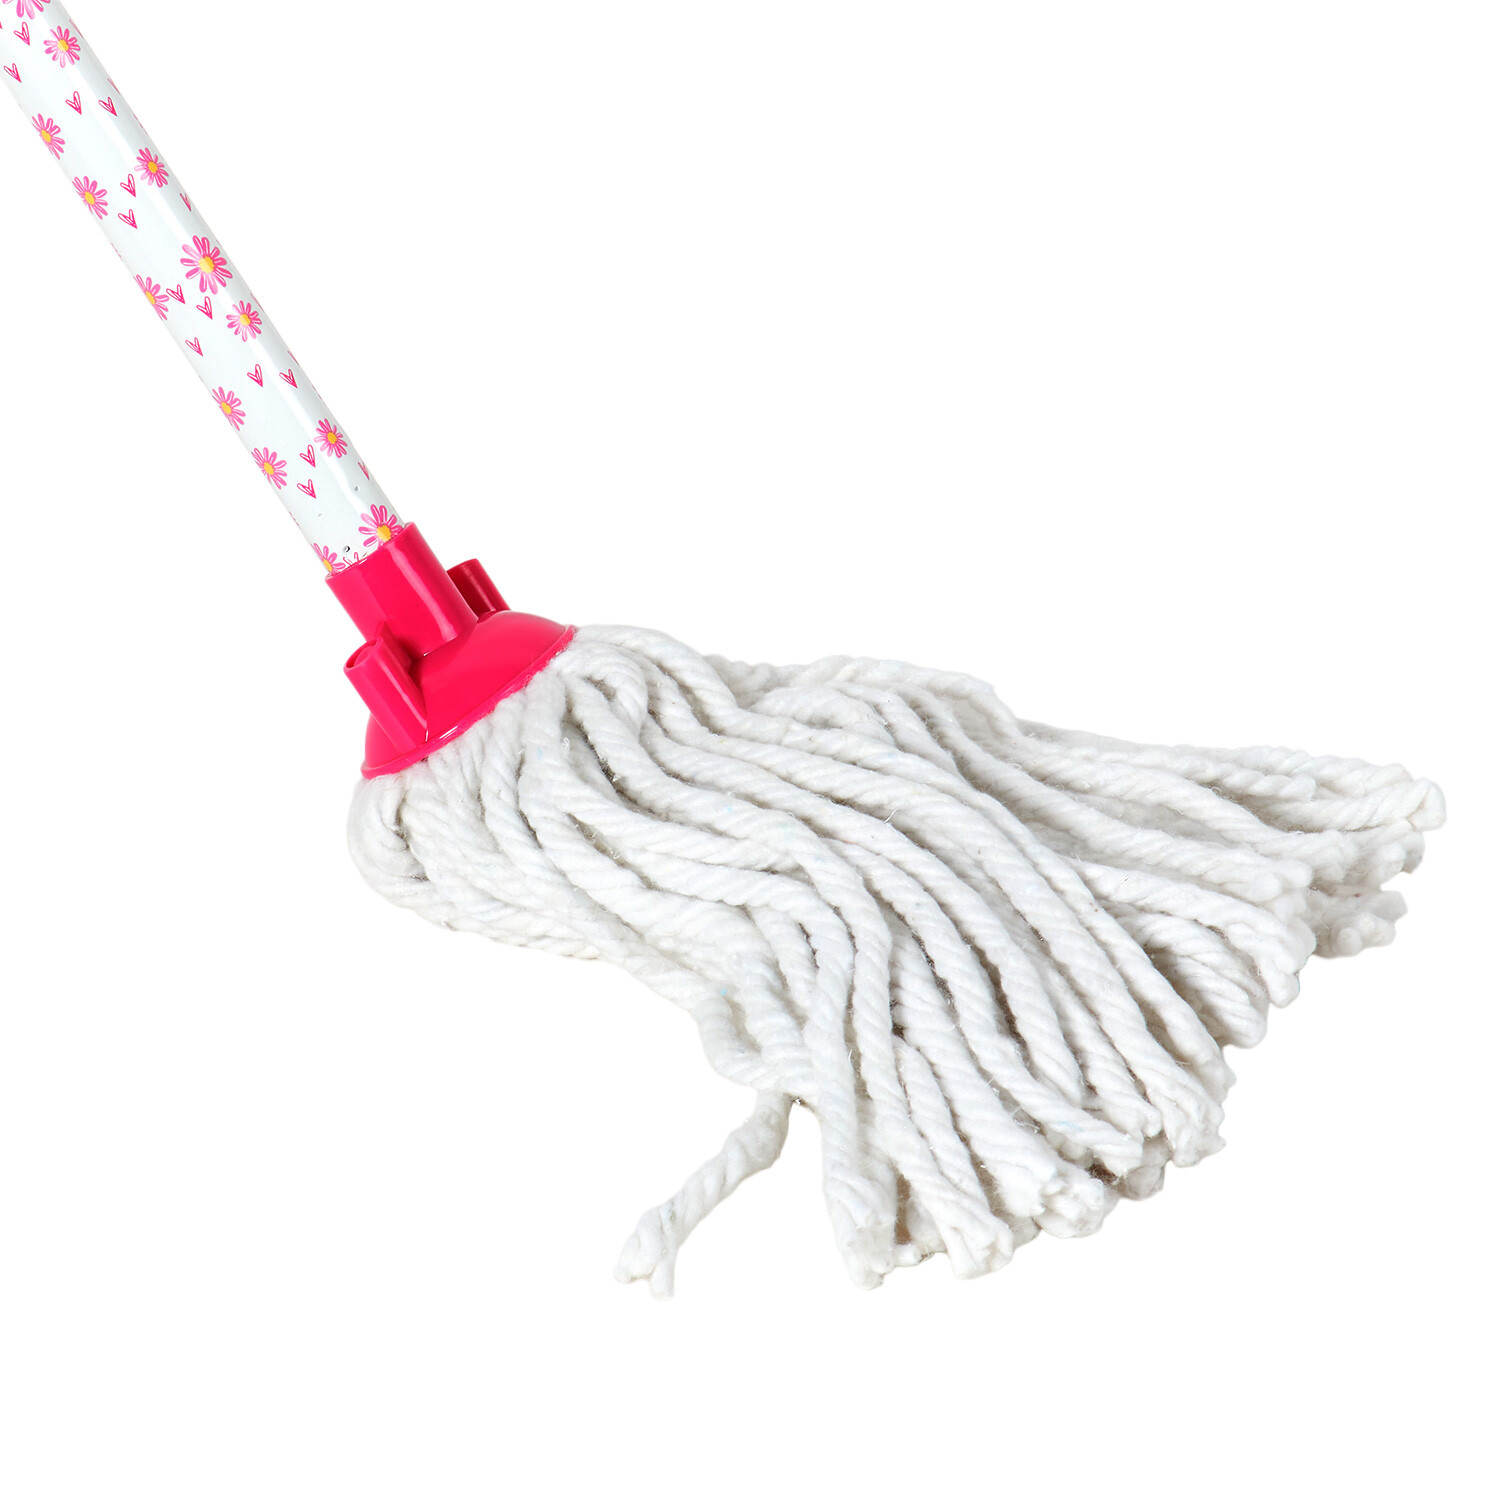 Daisy Pink Cotton String Mop with Long Handle Image 2